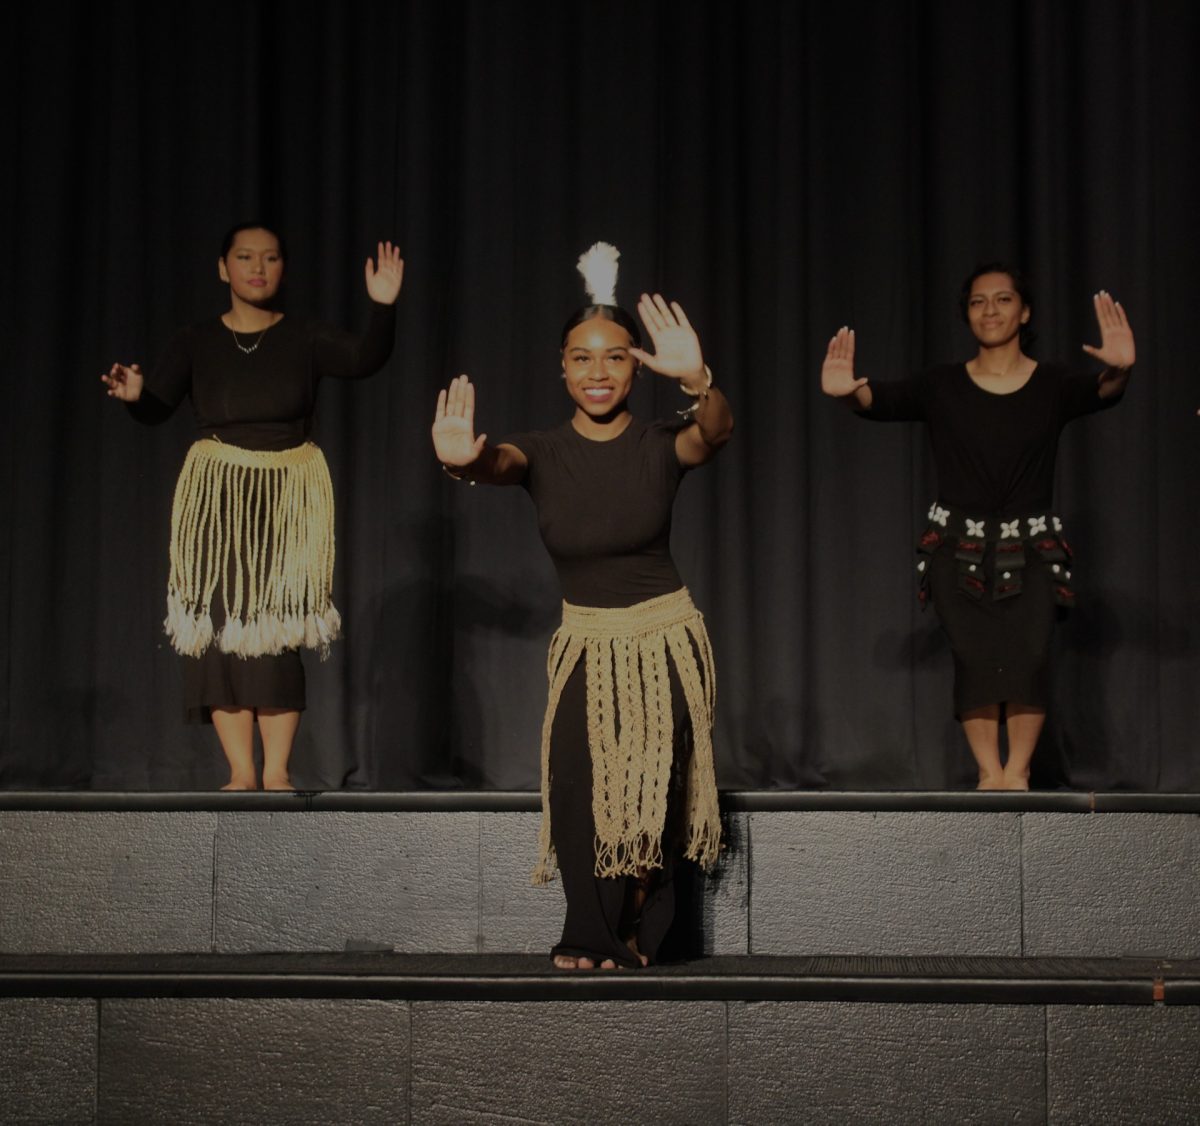 Madeleine Hosea (left), Lose Tenifa (middle), and Curly Taulanga (right) perform with the People of the Pacific in Highlands Multicultural Assembly.